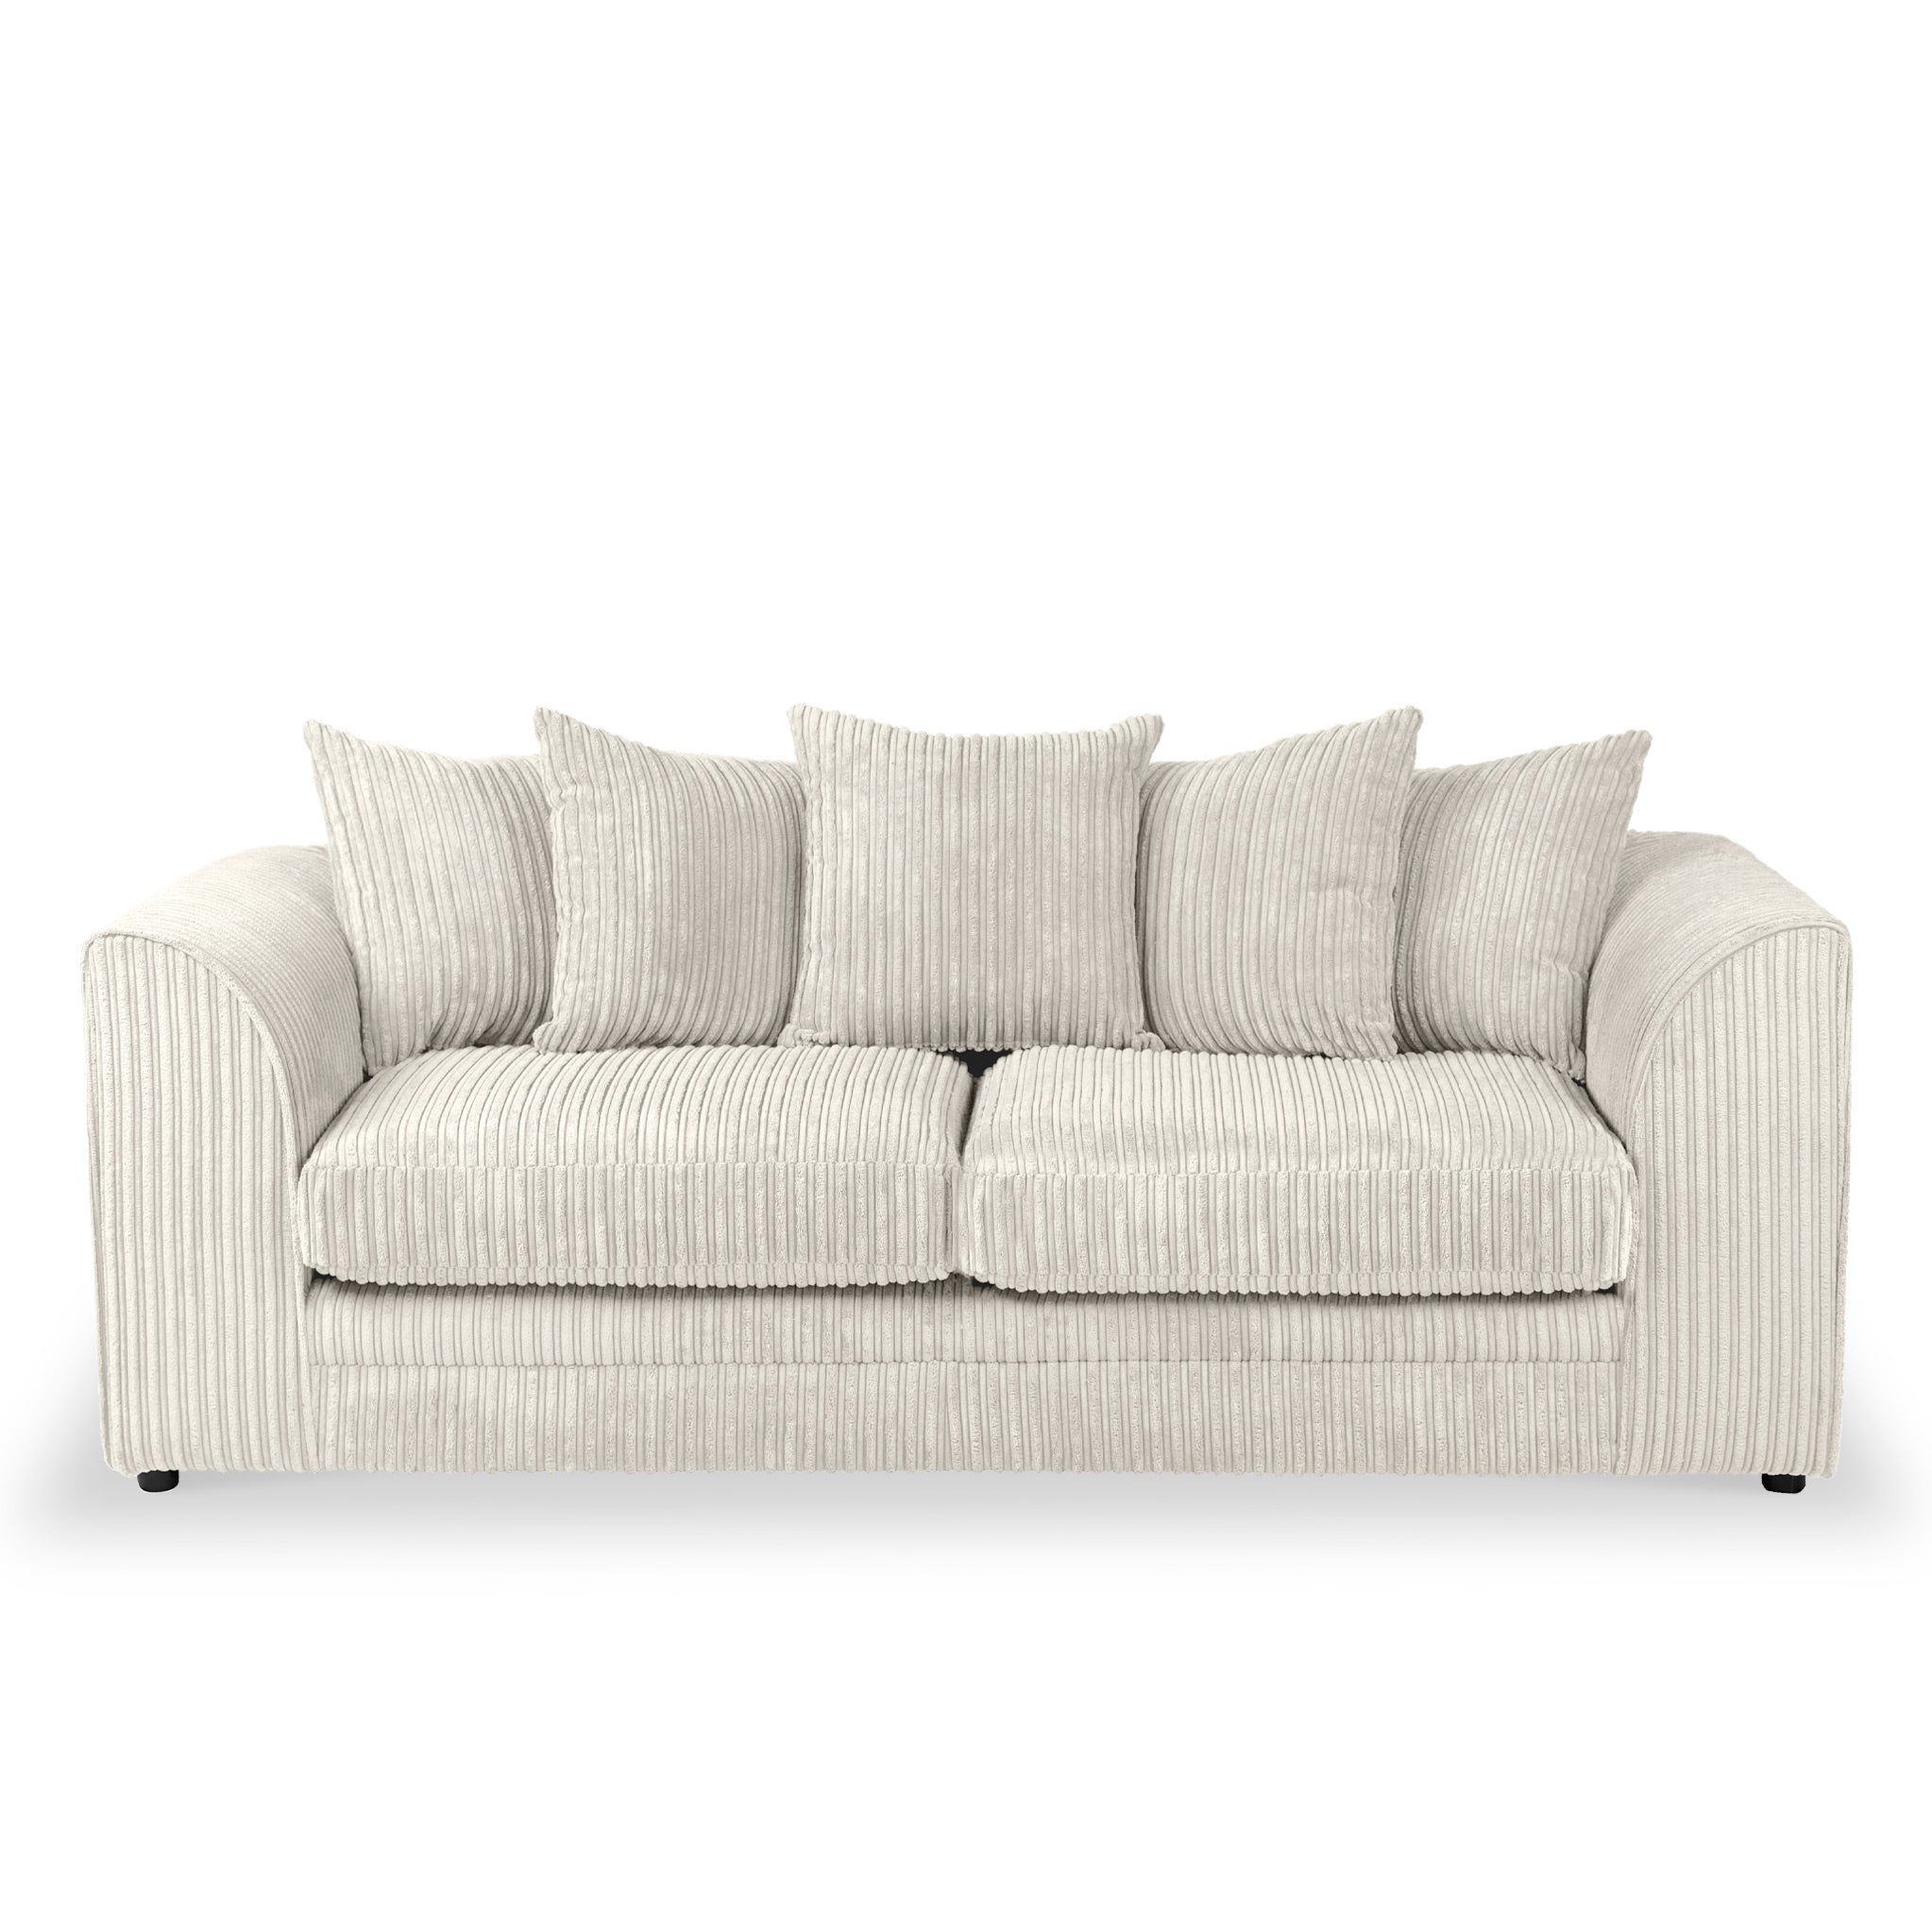 Bletchley 3 Seater Jumbo Cord Fabric Scatter Sofa Roseland